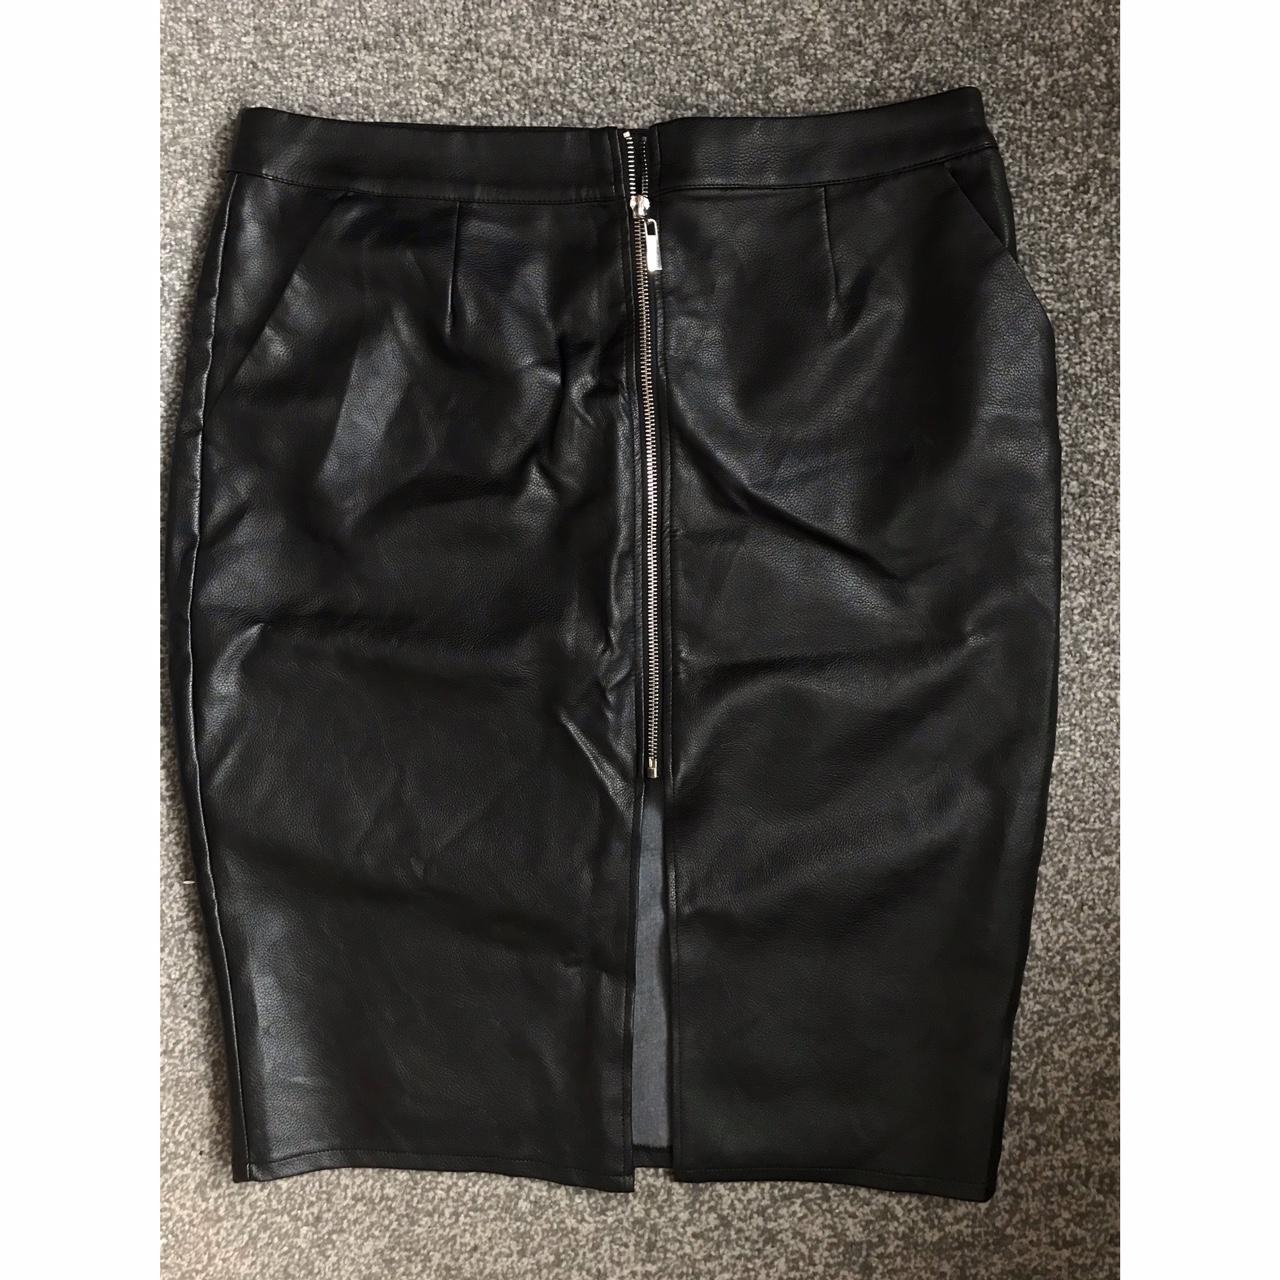 PRIMARK || midi leather skirt || size 16 - would fit... - Depop